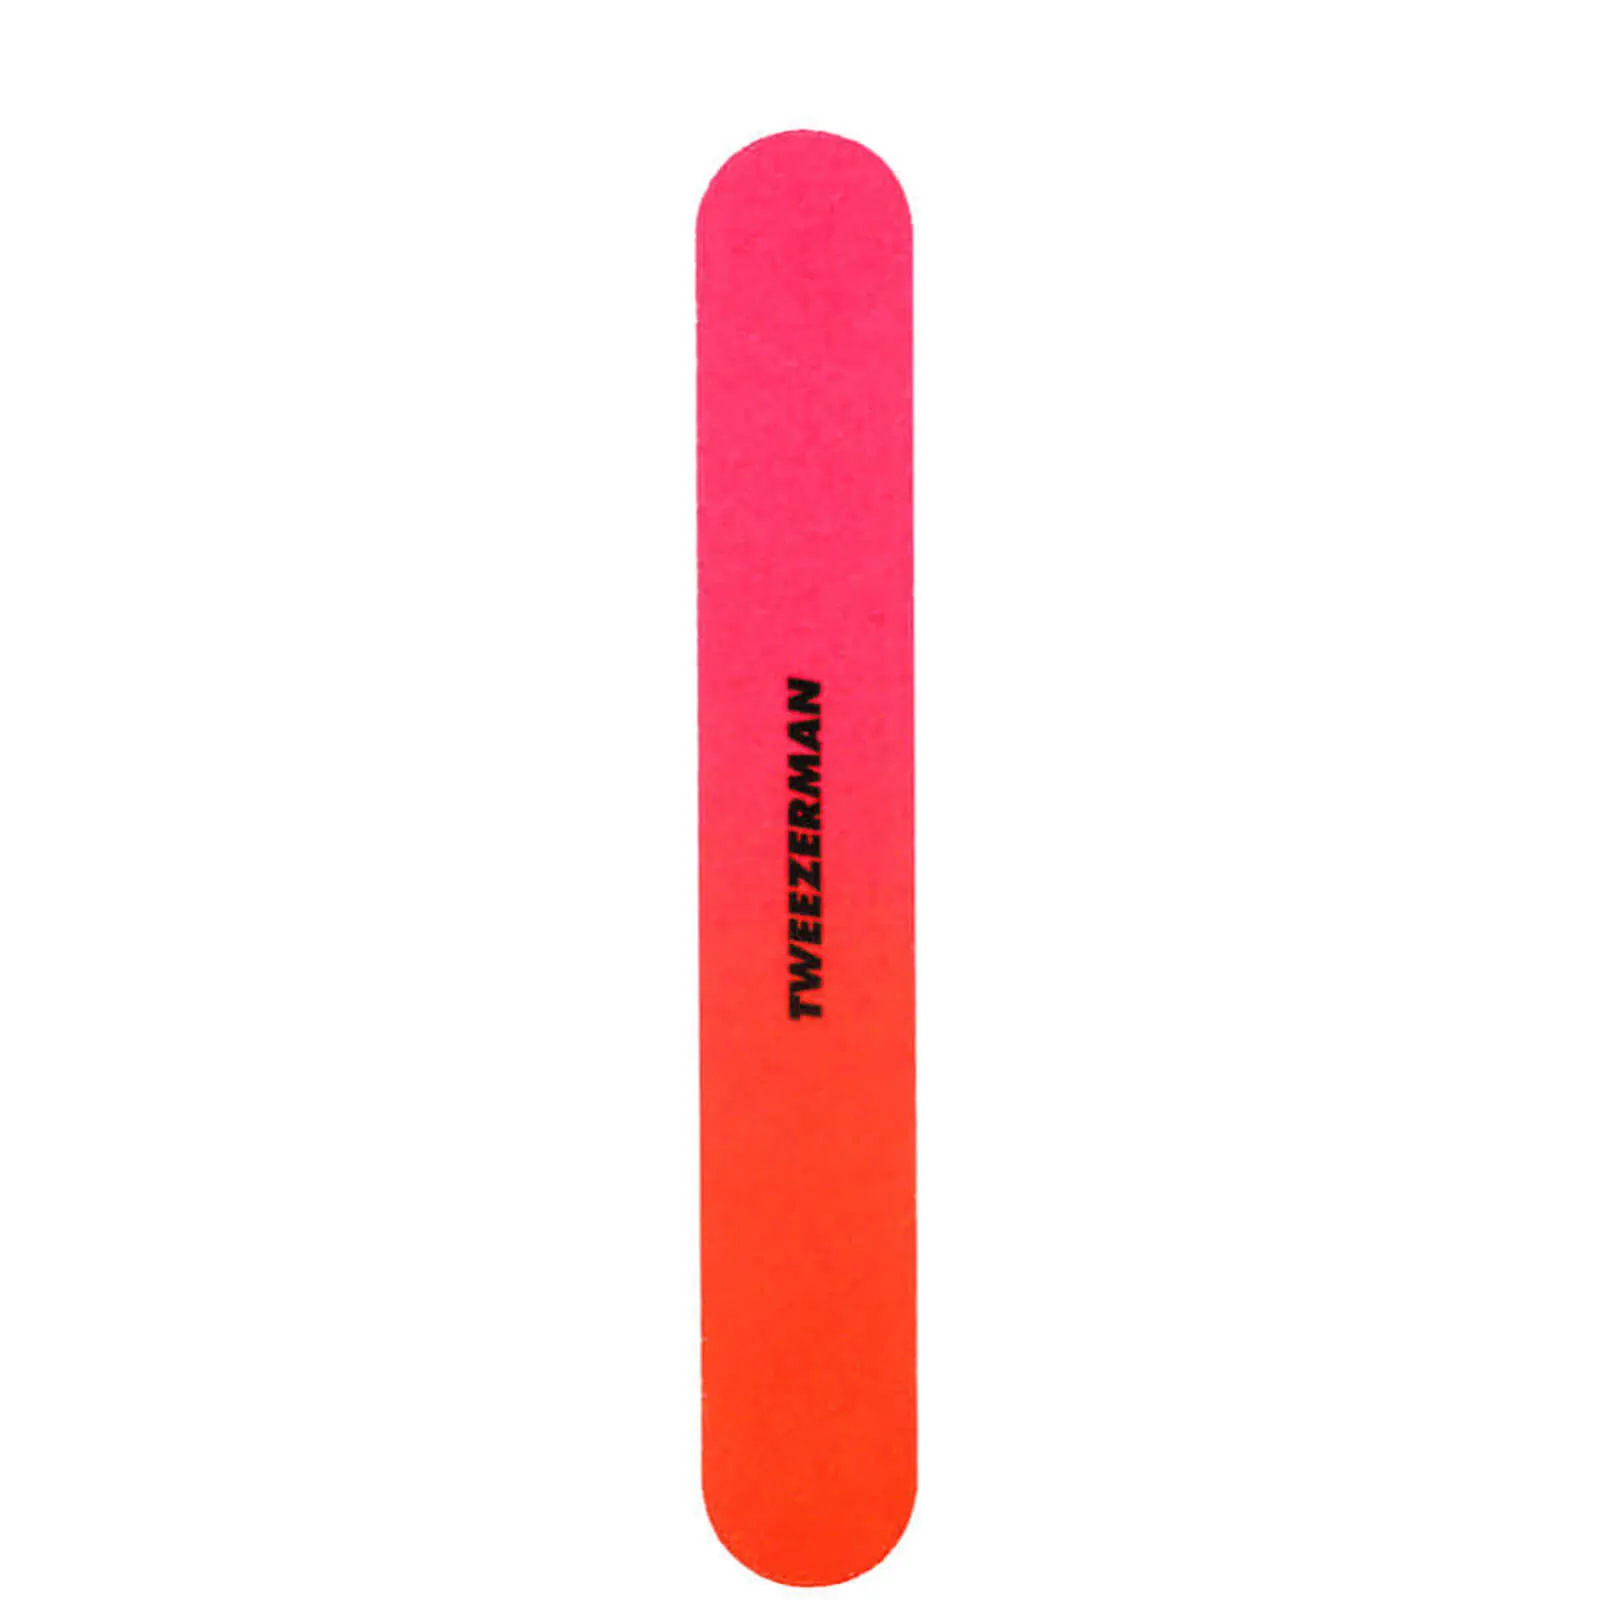  Neon Filemates (3 Nail Files and Case)